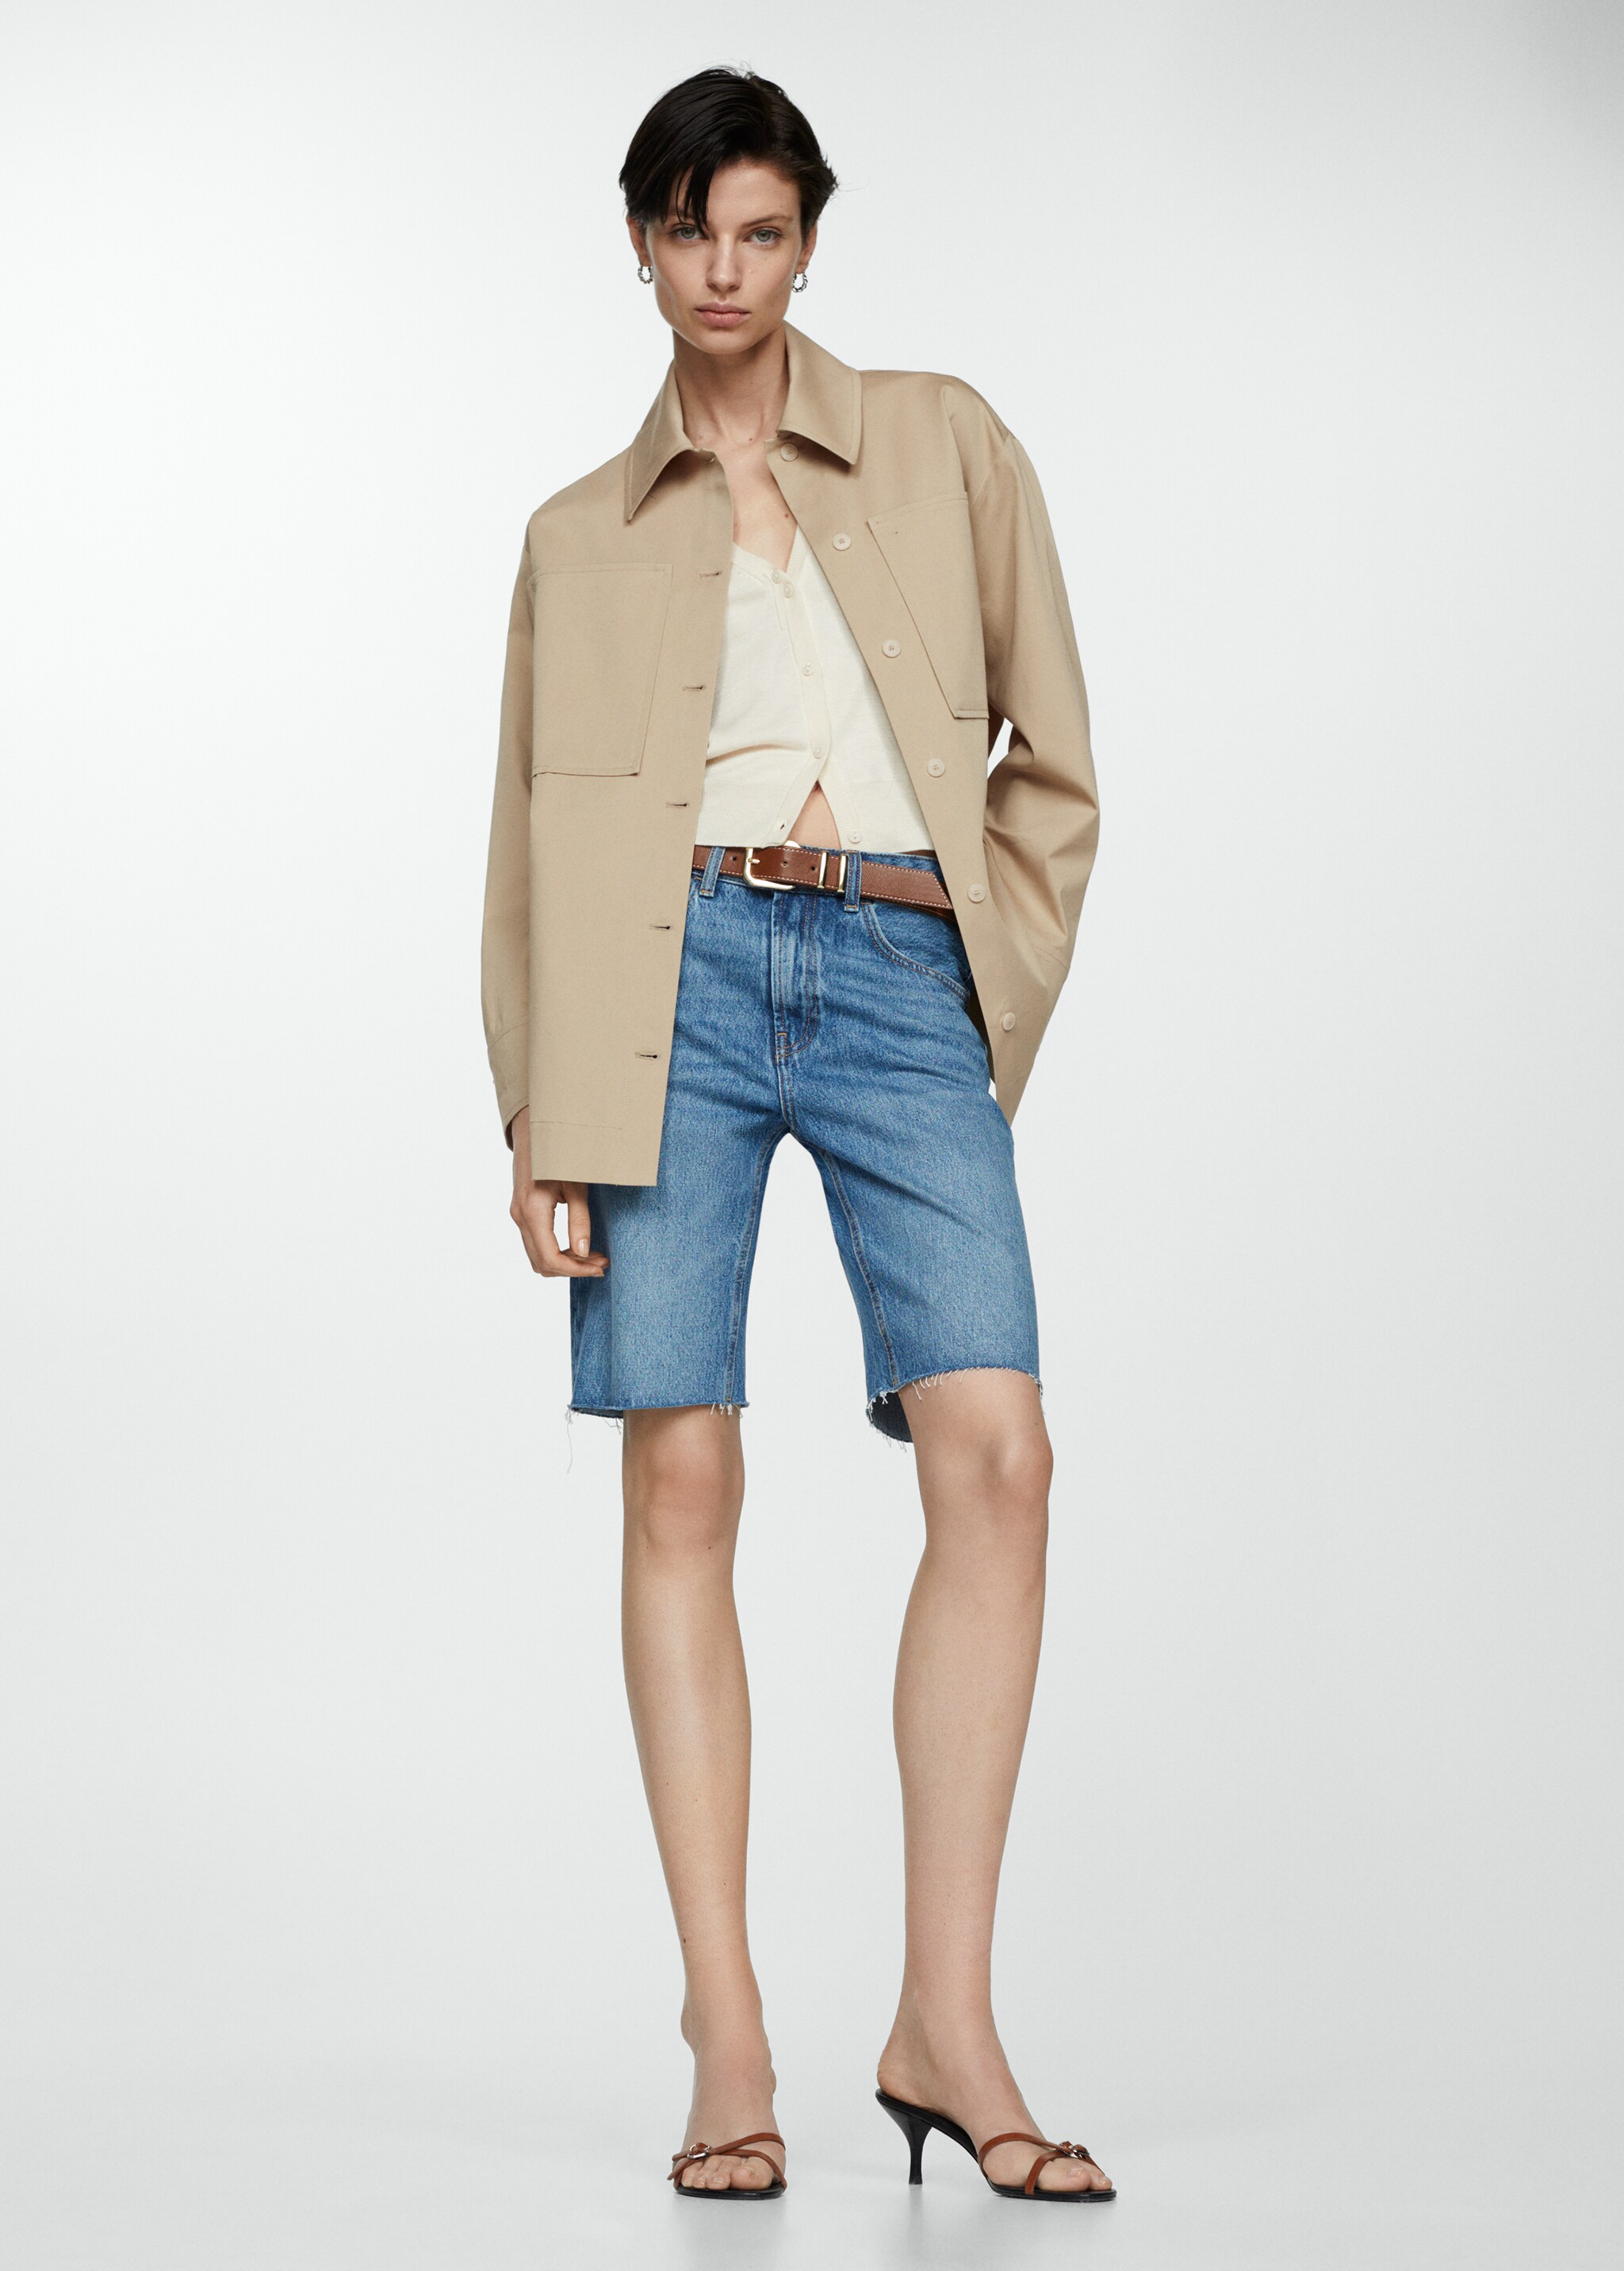 Oversized overshirt with pockets - General plane